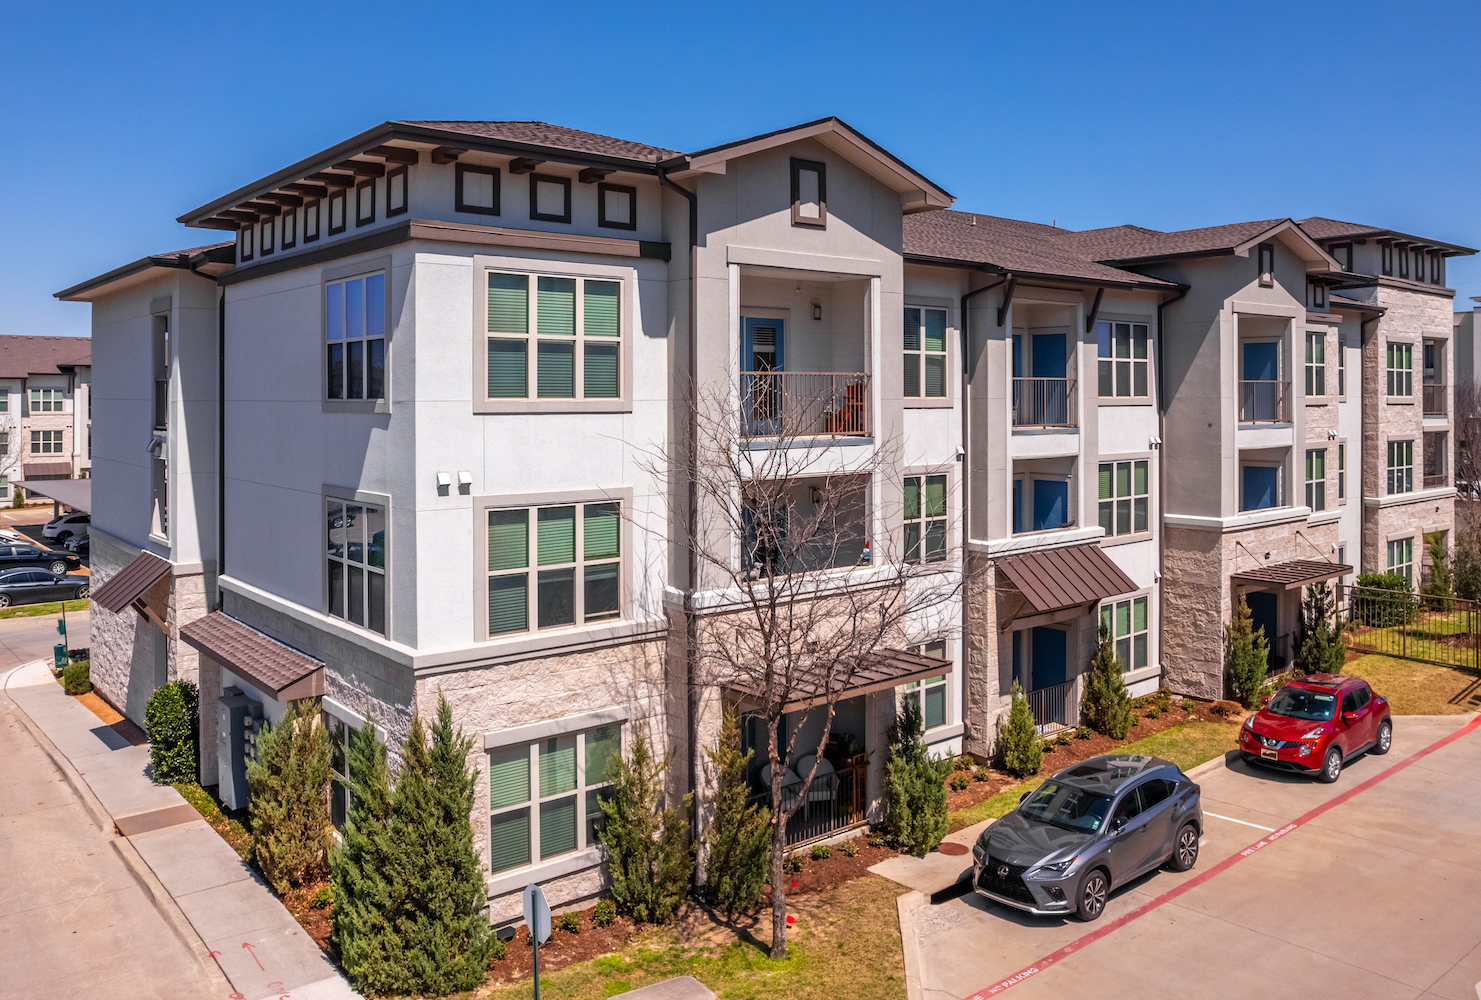 Waterford Property Company and Partners Acquire 395-Unit Domain at Midtown Park in Dallas to Convert to Workforce Housing